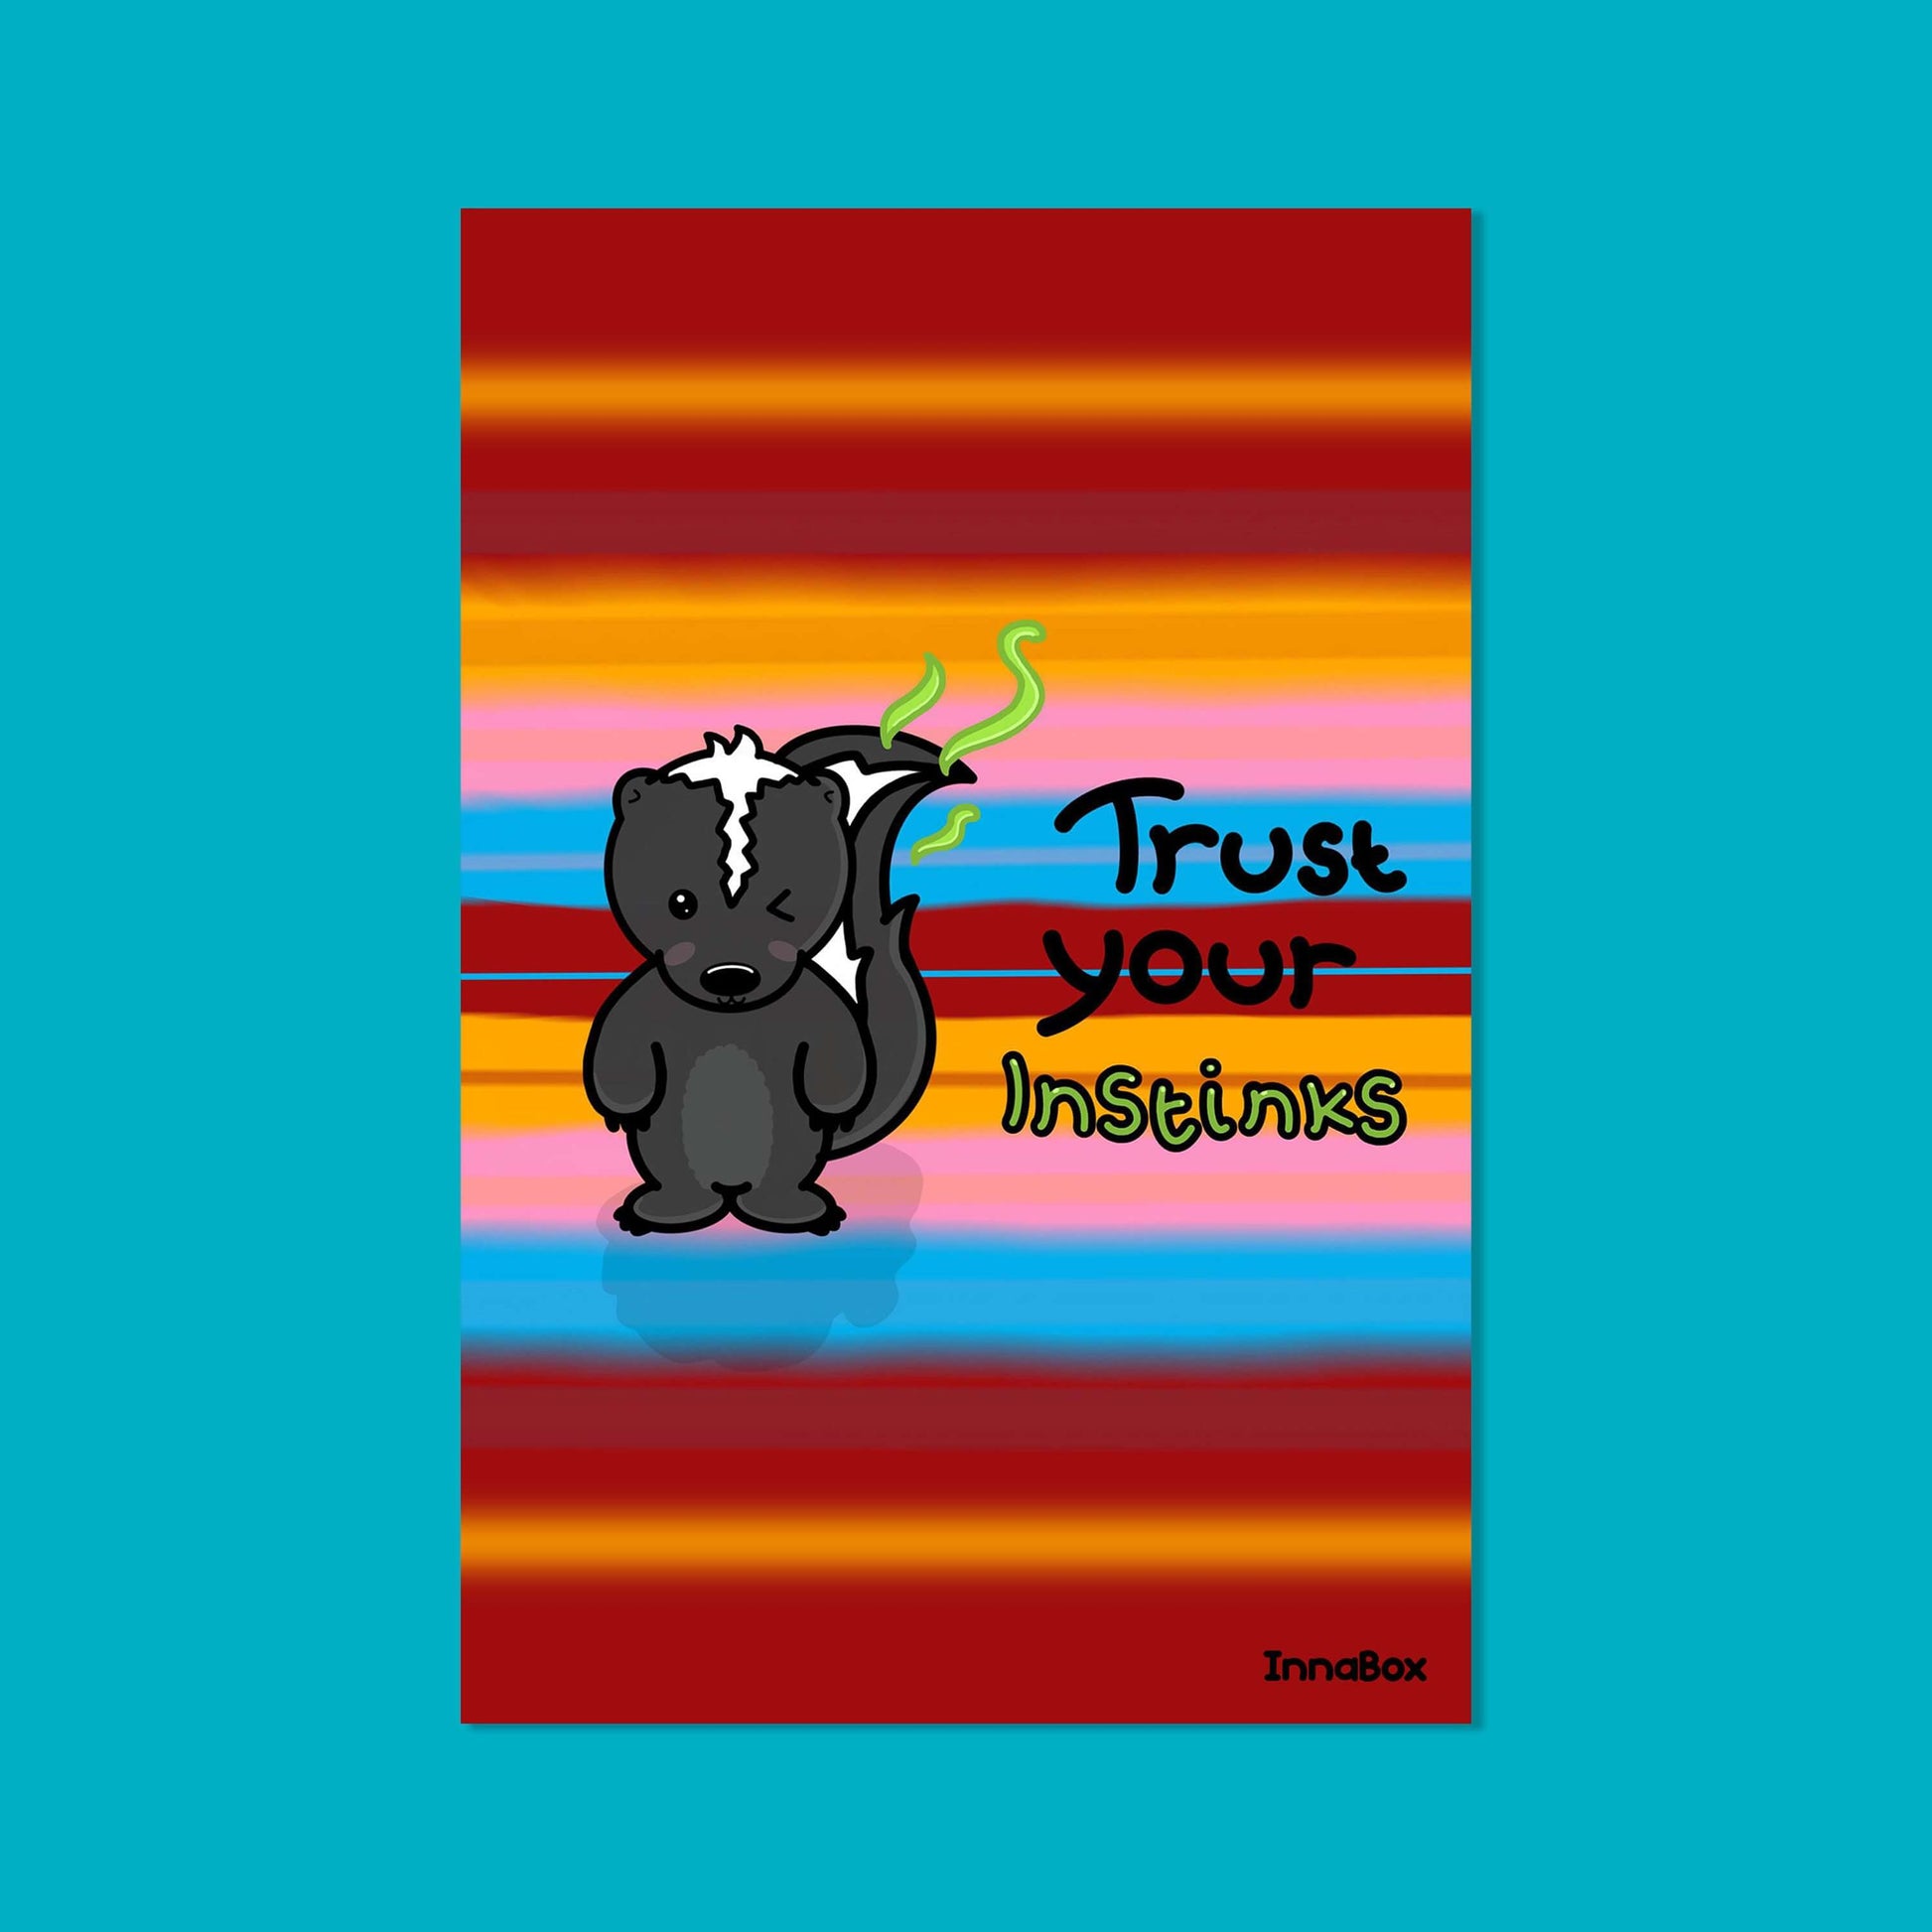 Trust Your Instinks - Skunk Postcard on a blue background. The coloured stripy postcard has an illustration of a skunk with one eye closed and green fumes coming from it's tail. 'Trust your' is written next to it in black text with 'instinks' under it in green text